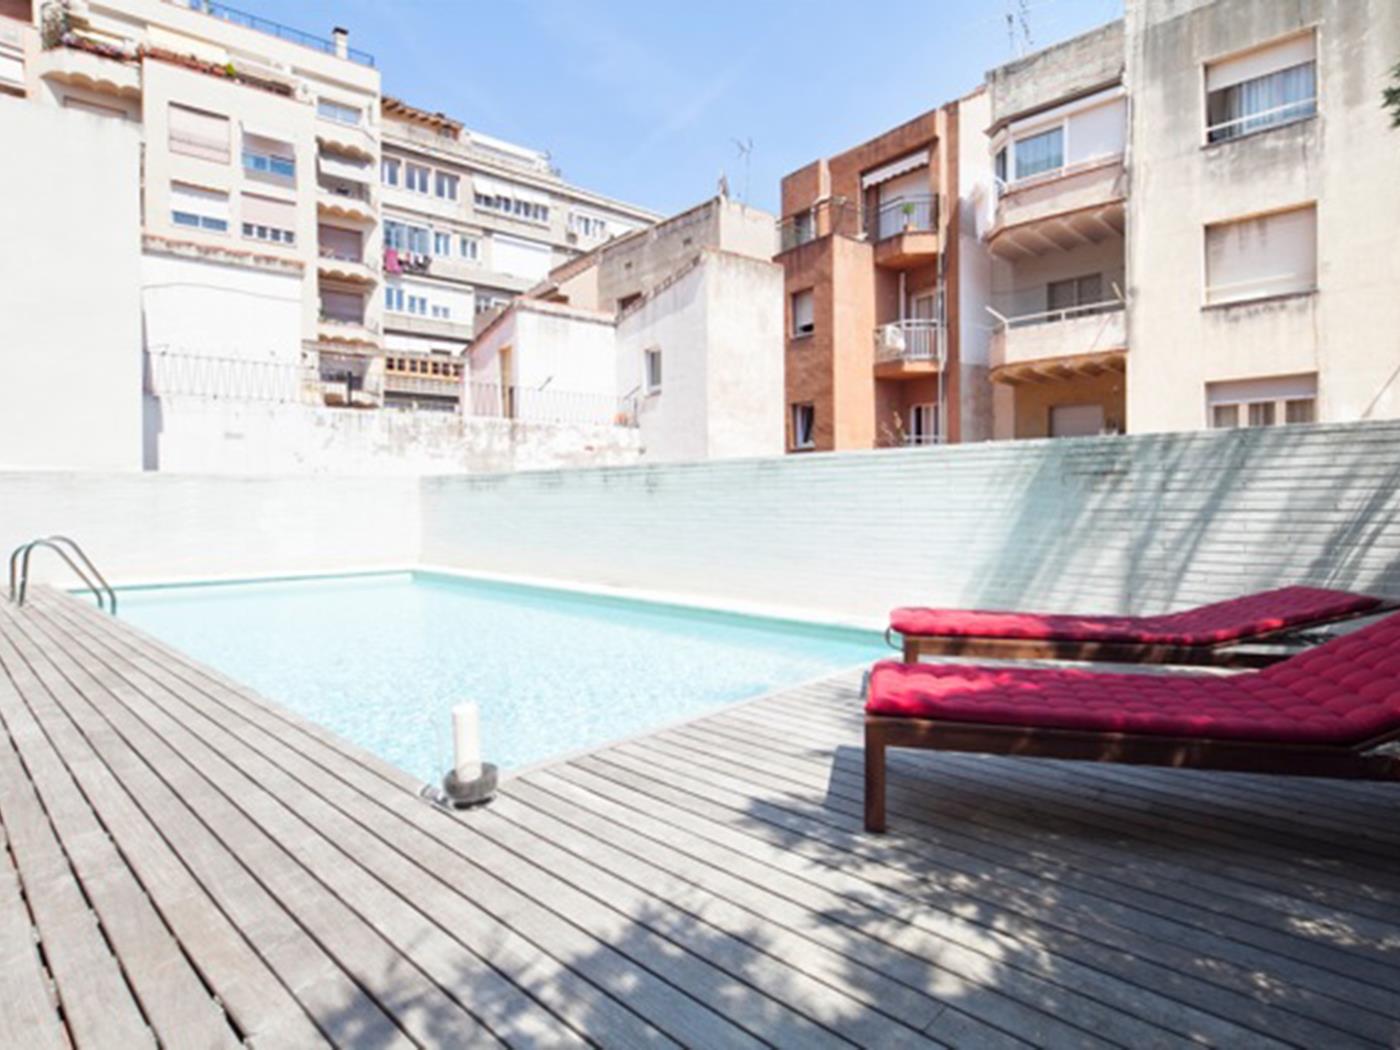 Group of 2 duplexes for up to 16 persons with with terrace & pool in the centre - My Space Barcelona Apartments